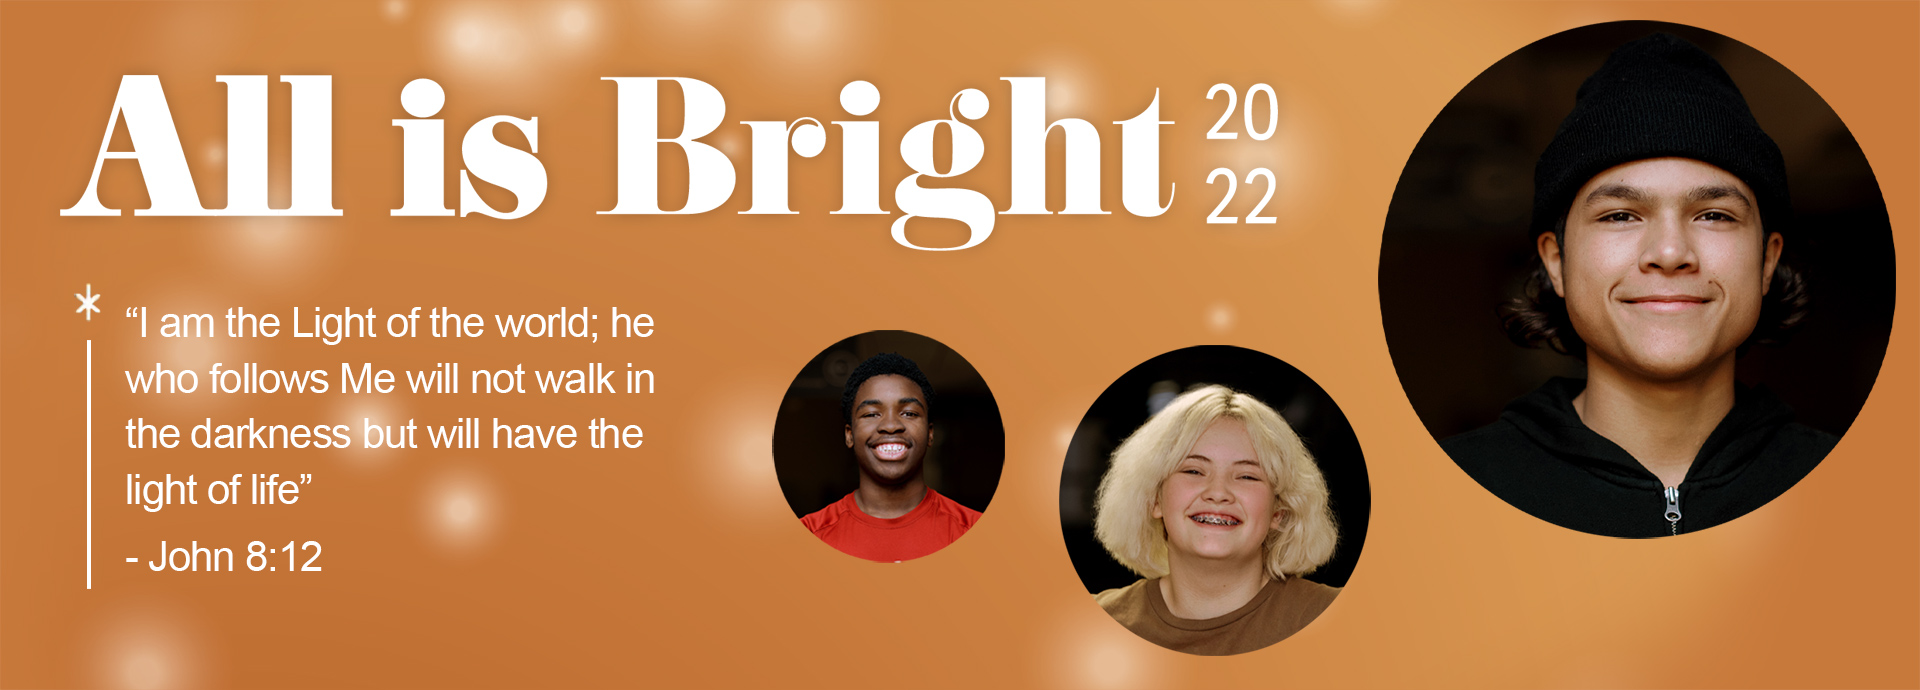 All is Bright 2022 - Giving Campaign